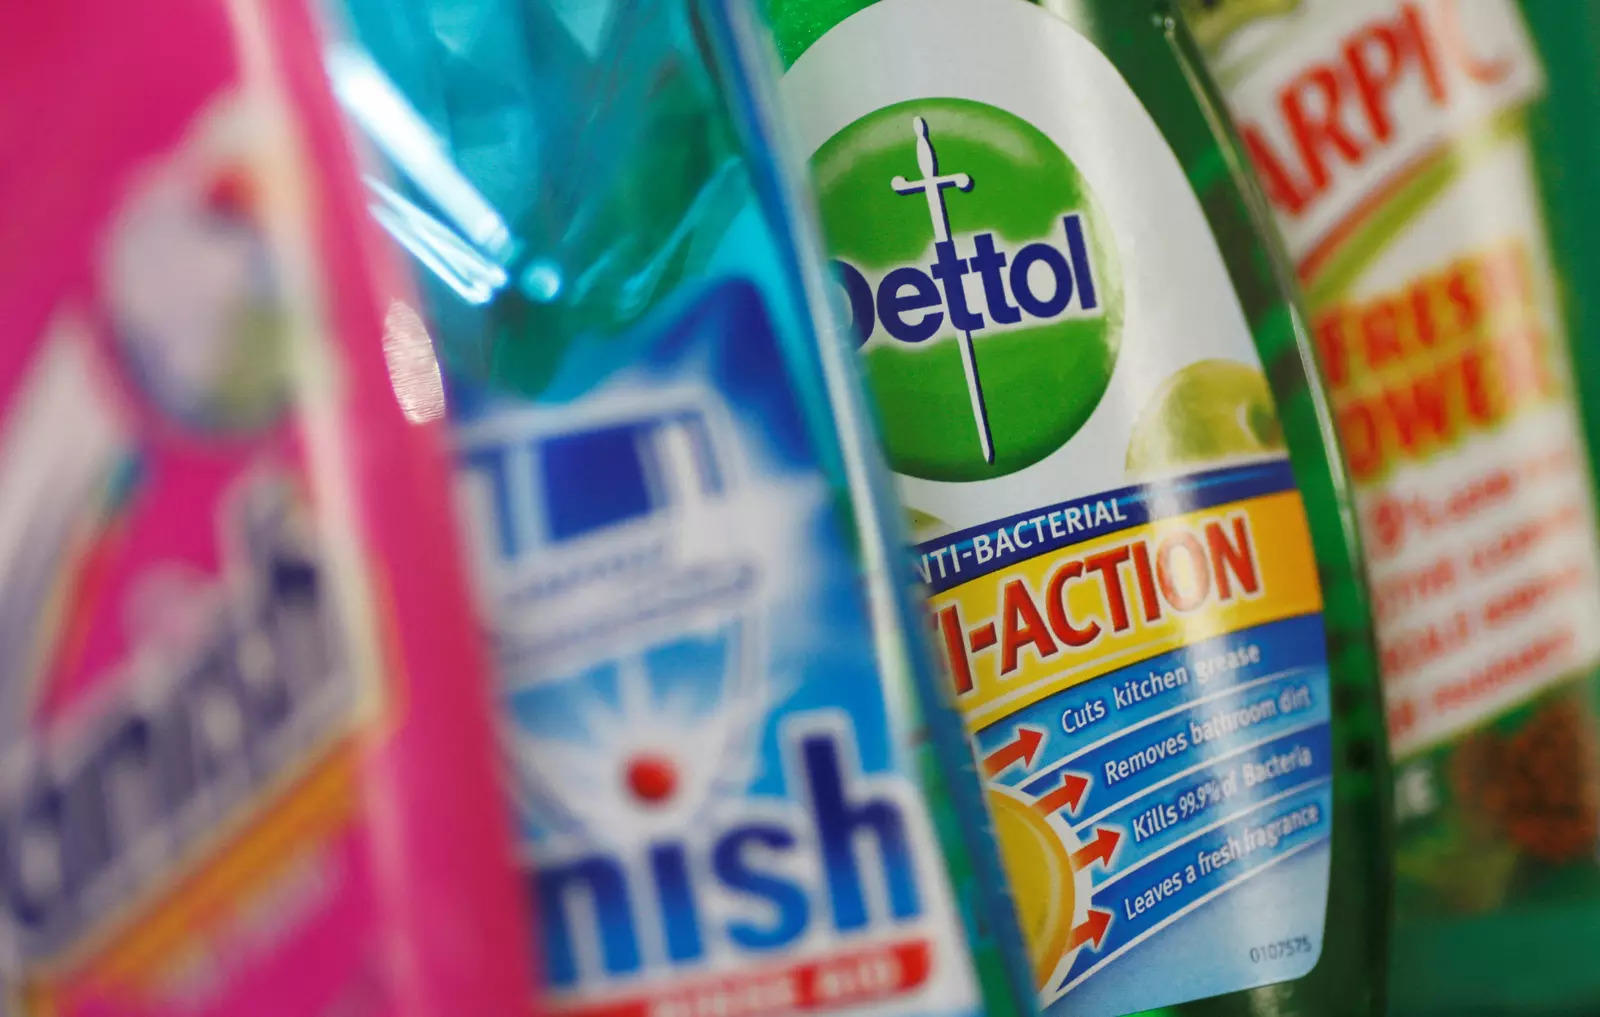 Reckitt ups sales forecast on price hikes and baby formula